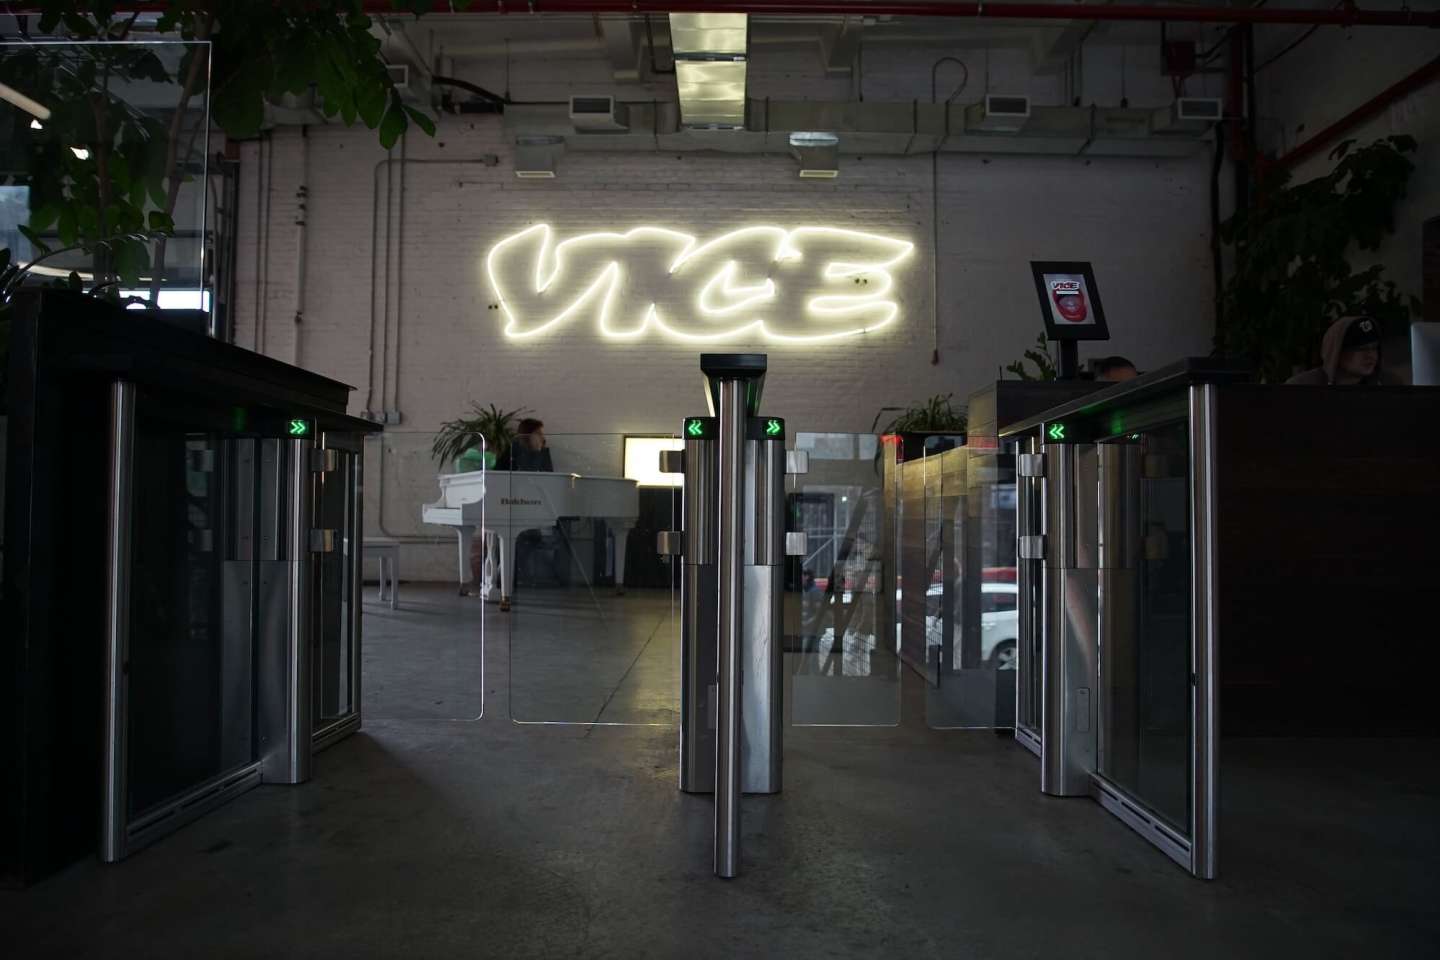 The bankruptcy of “Vice”, the American media group